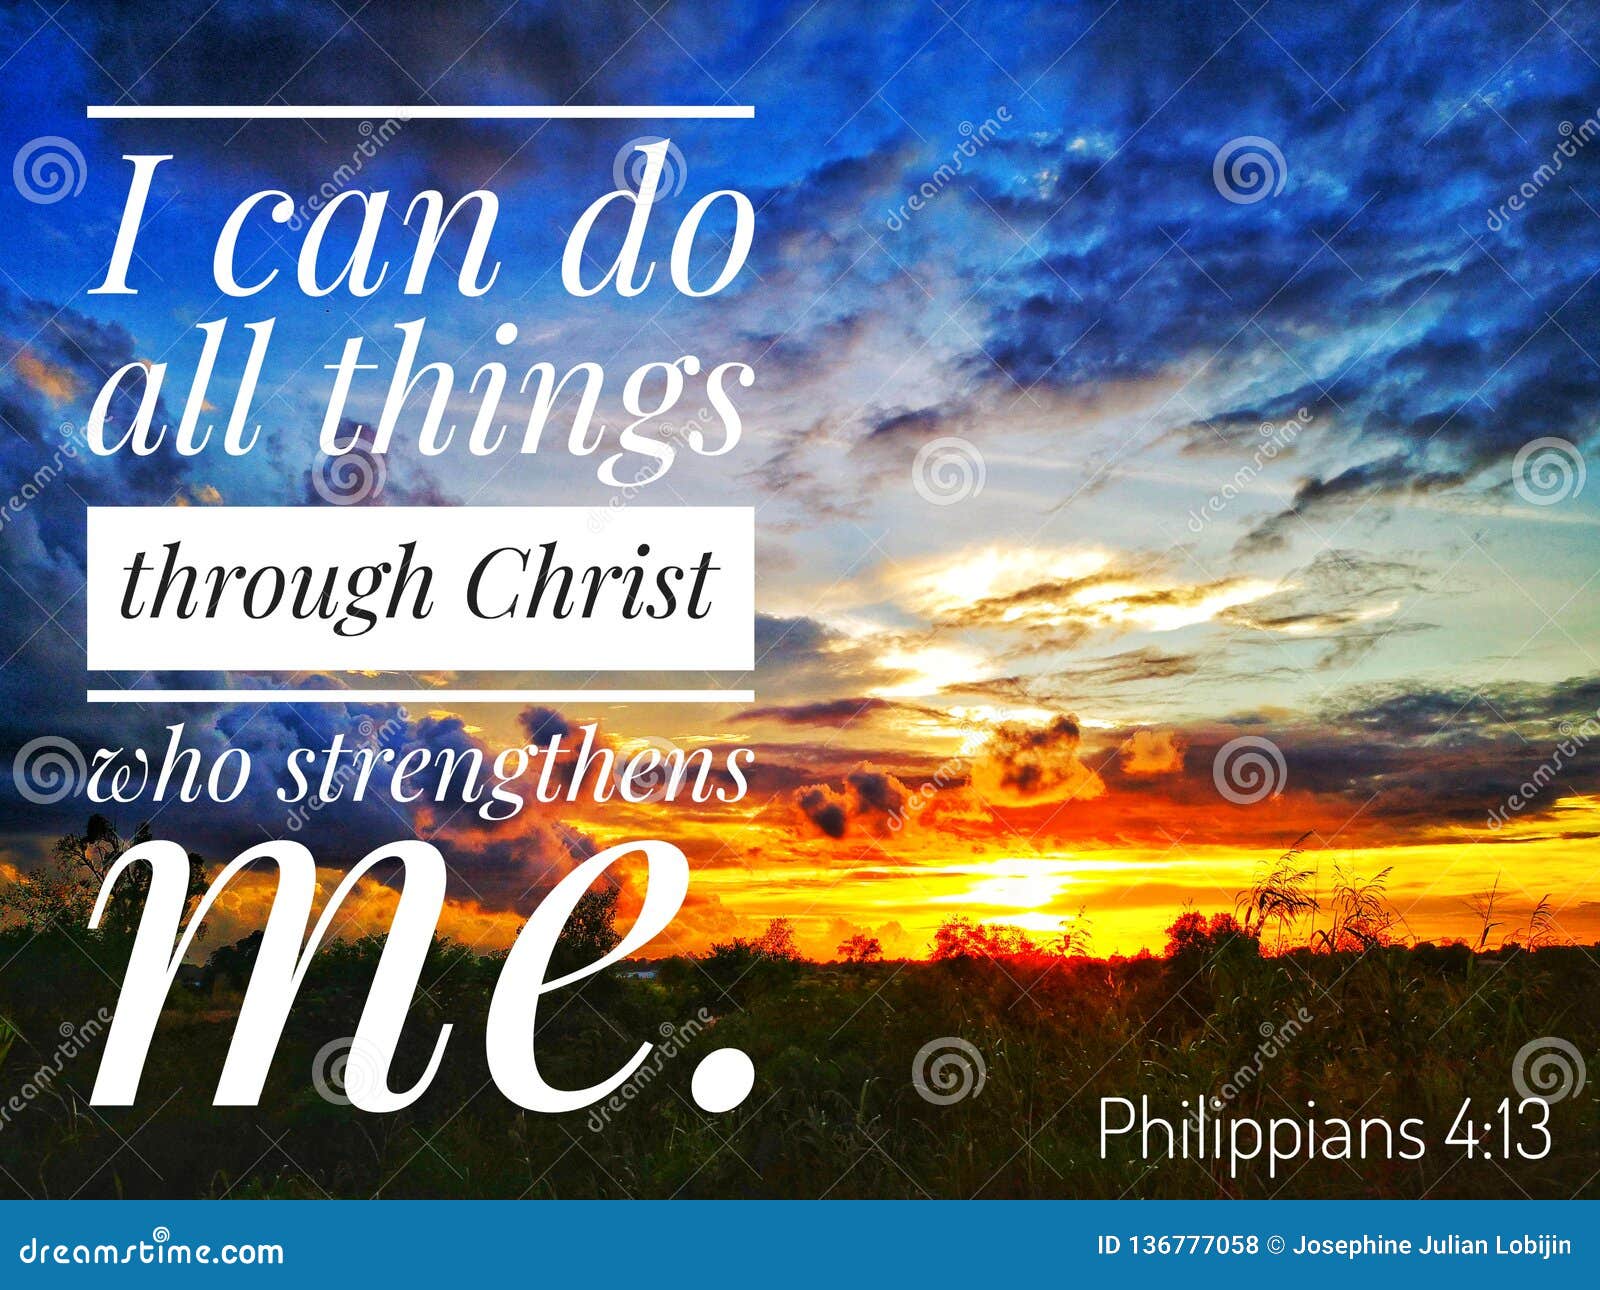 i can do all things through christ who strengthens me.